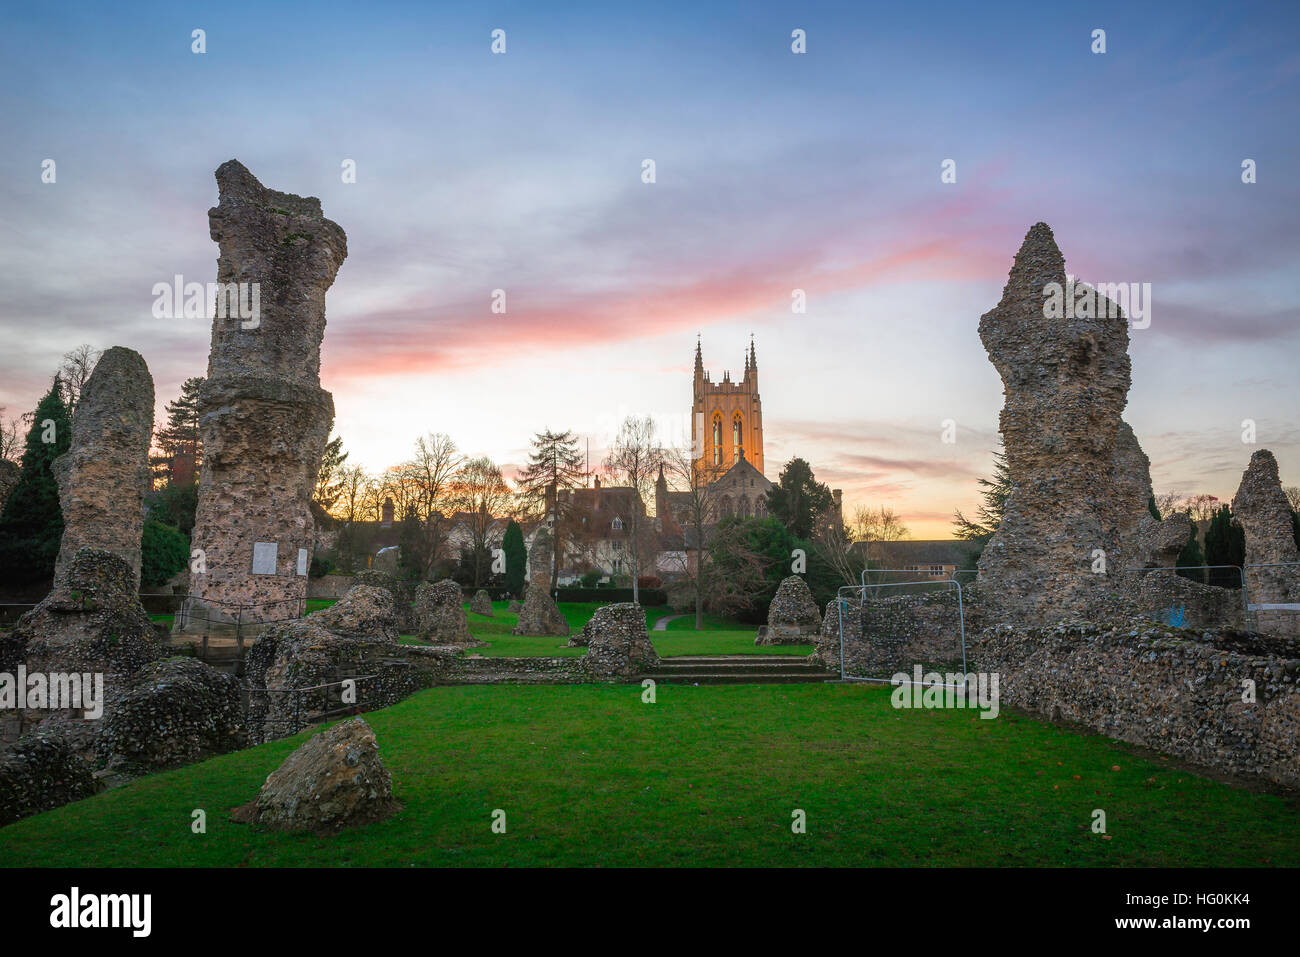 Bury St Edmunds Abbey Gardens, view of the cathedral and the ruins of the medieval abbey in Bury St Edmunds, Suffolk, at dusk Stock Photo